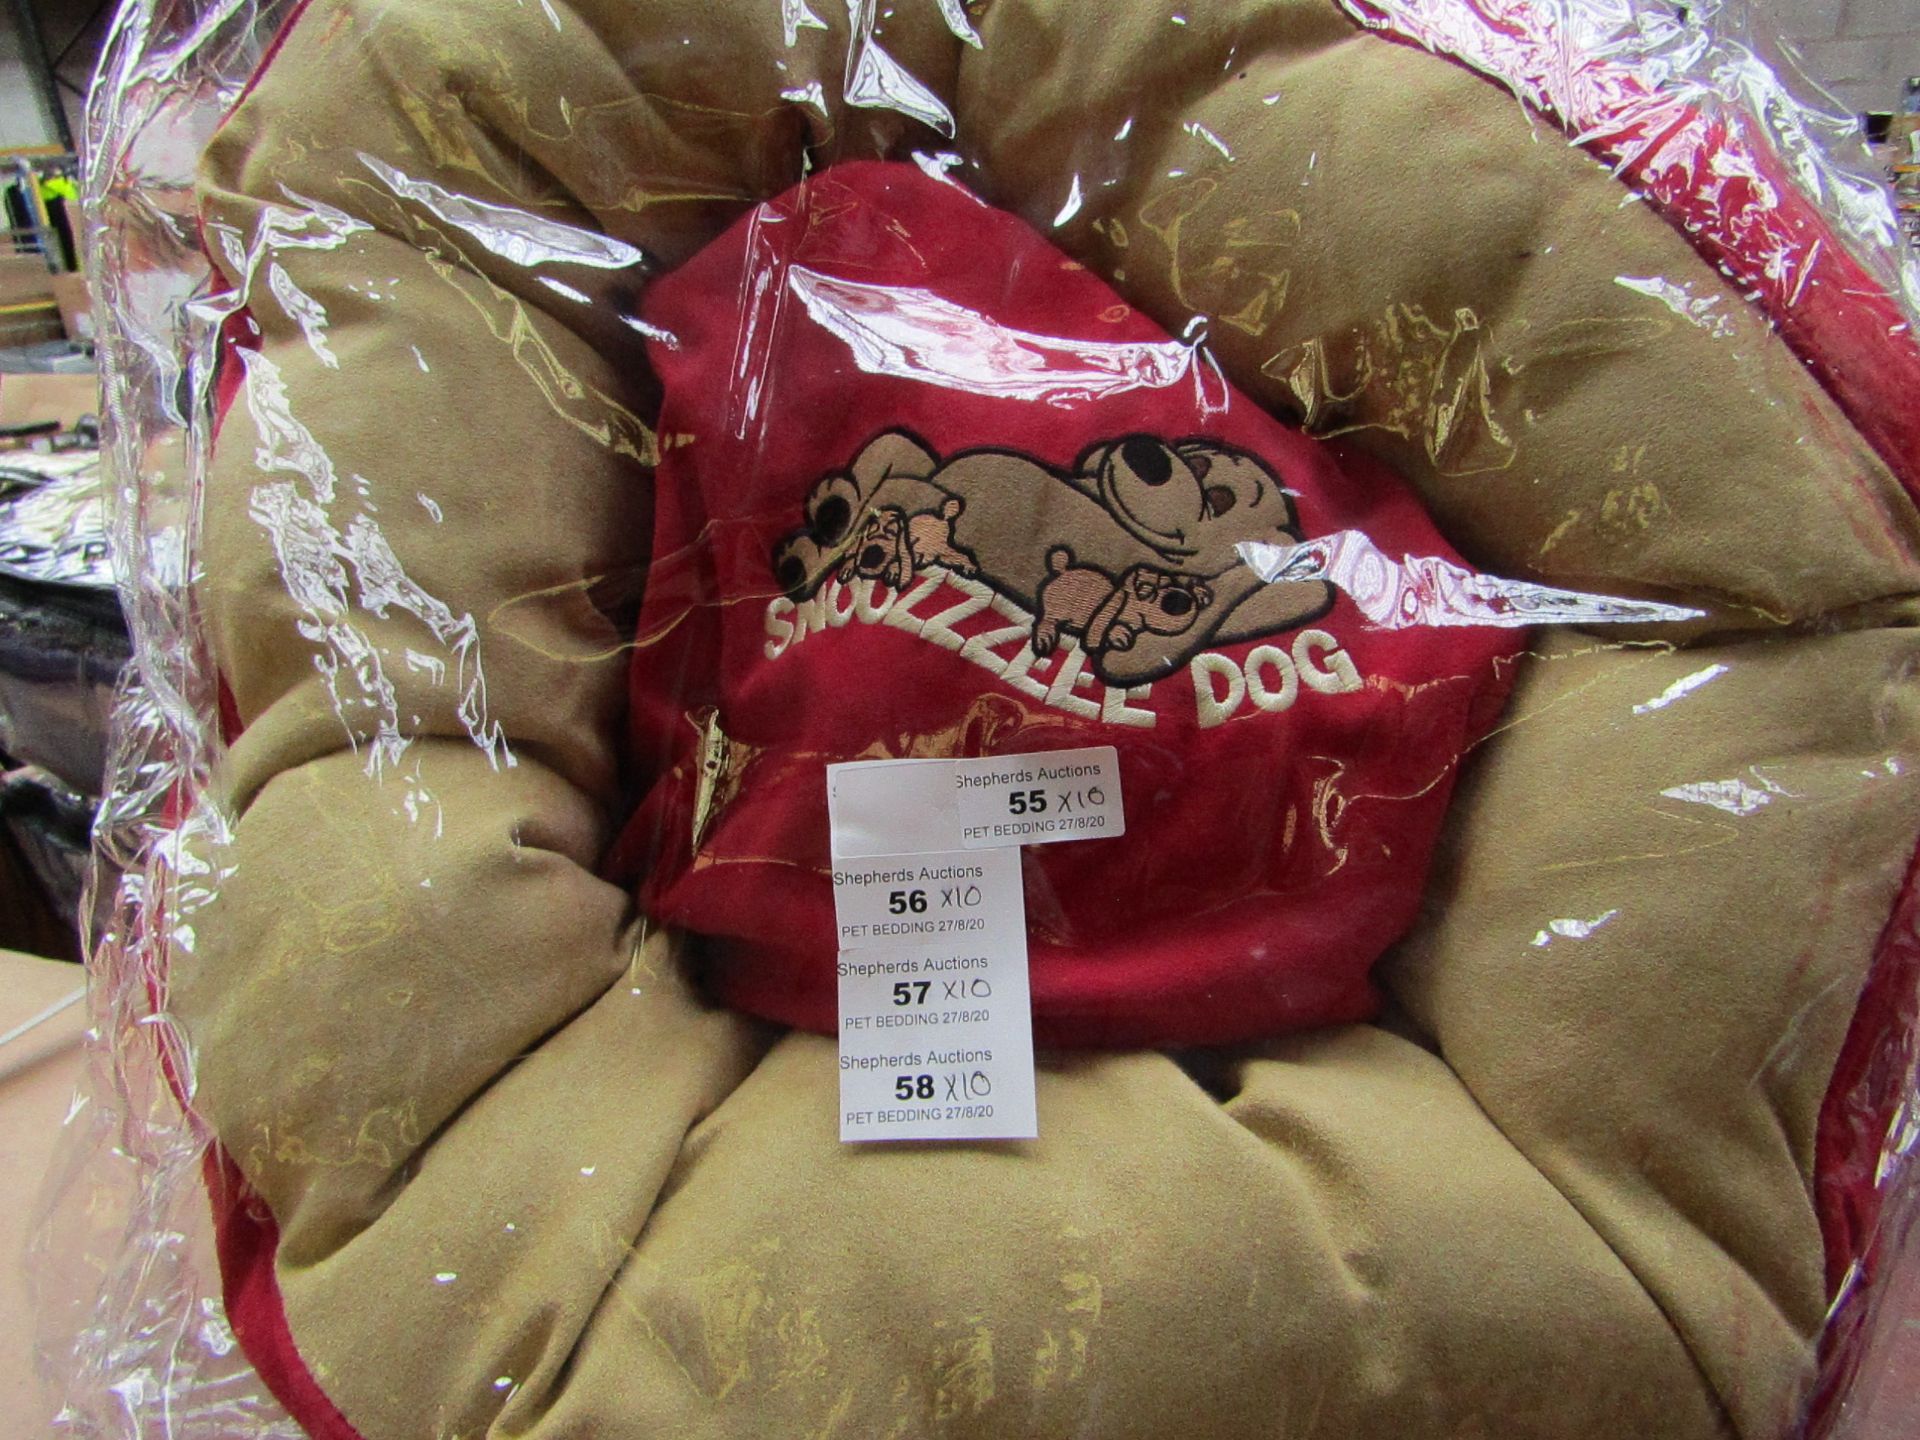 10x Snoozzzeee Dog - Cherry Red Donut Dog Bed (Size 1) - All New & Packaged.